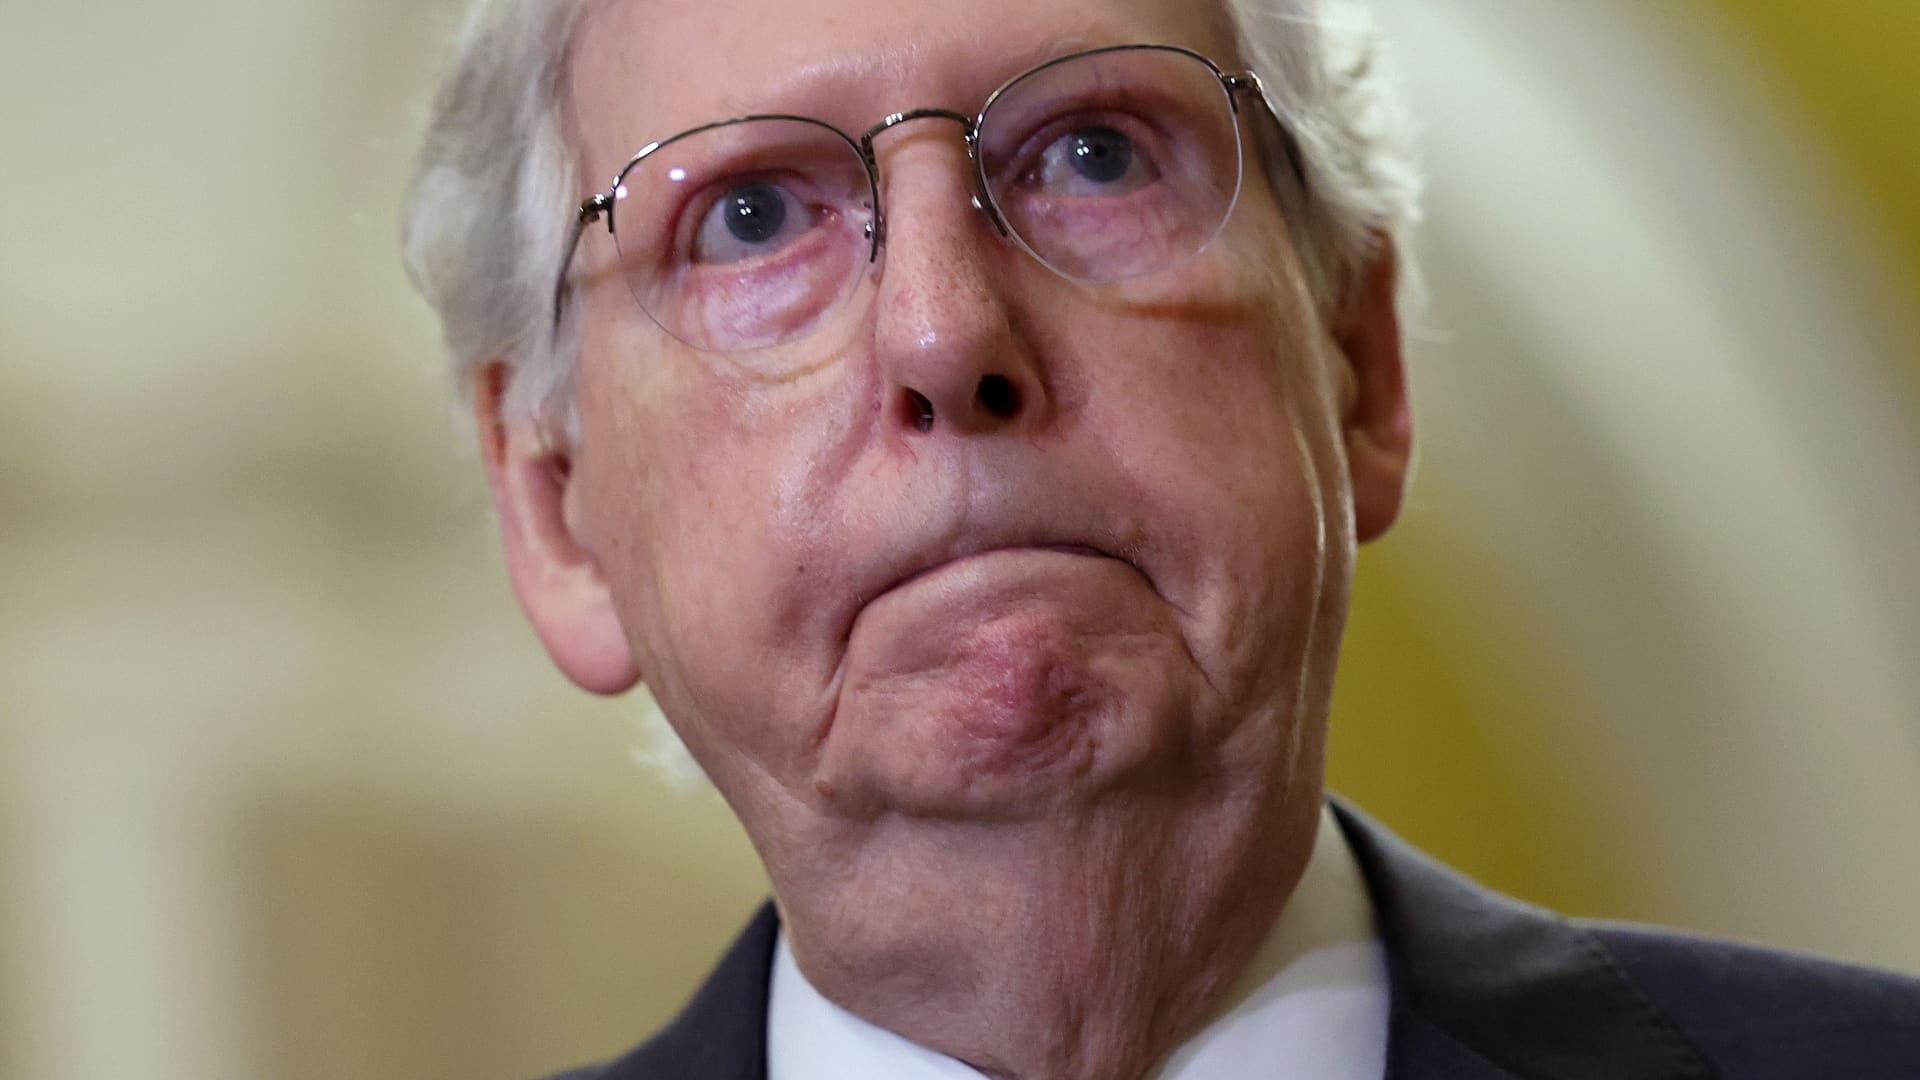 Mitch McConnell freezes, struggles to speak in second incident this summer